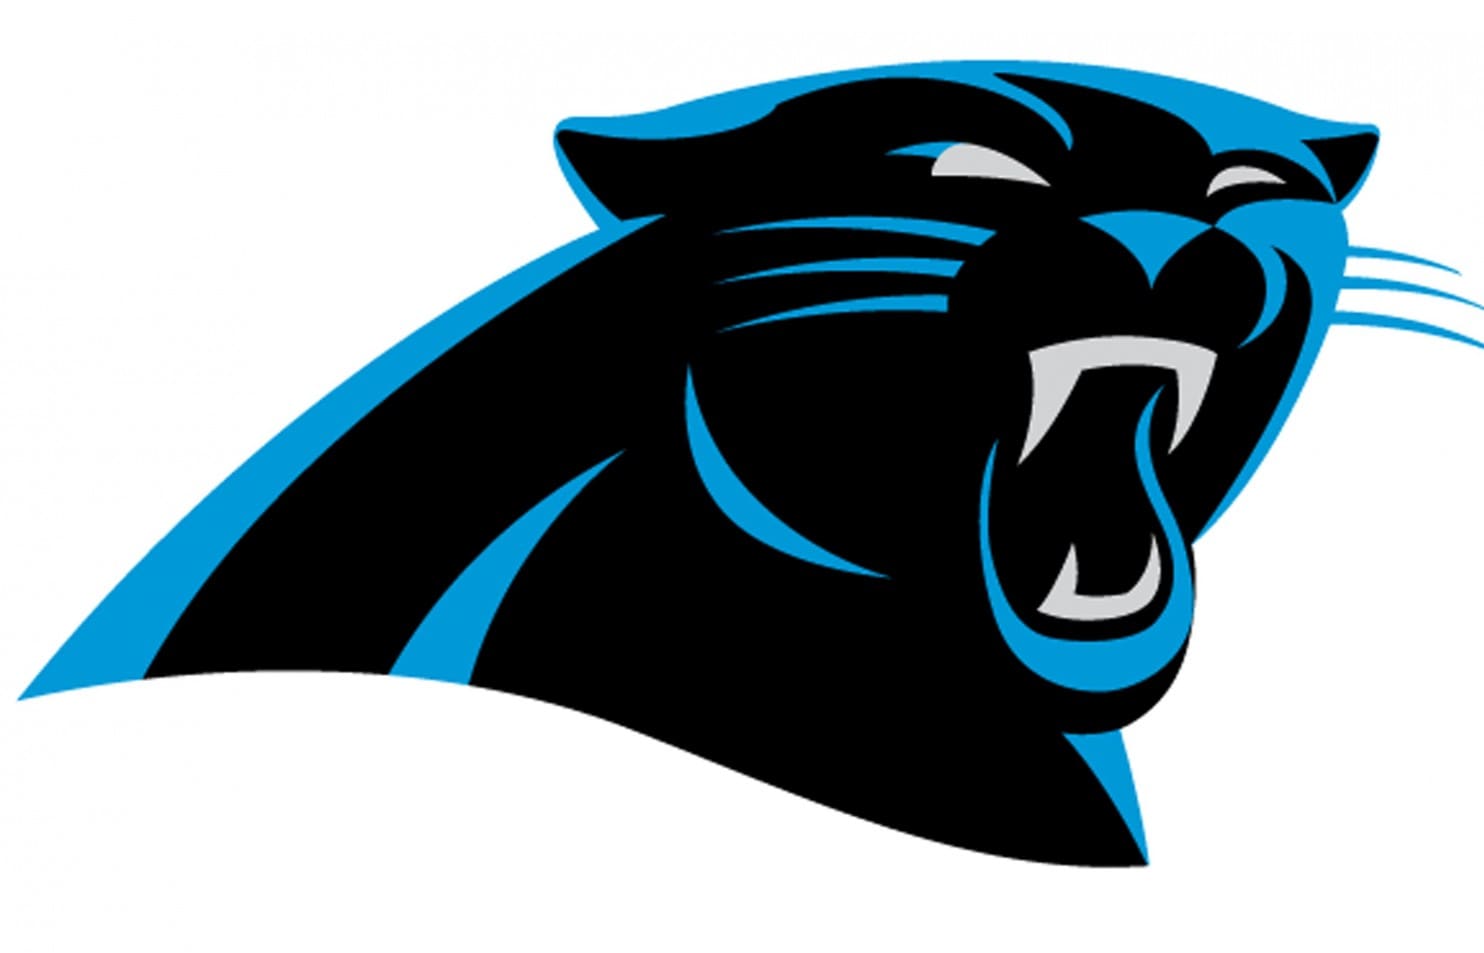 Carolina Panthers 2021 NFL Schedule, roster, live stream without Reddit